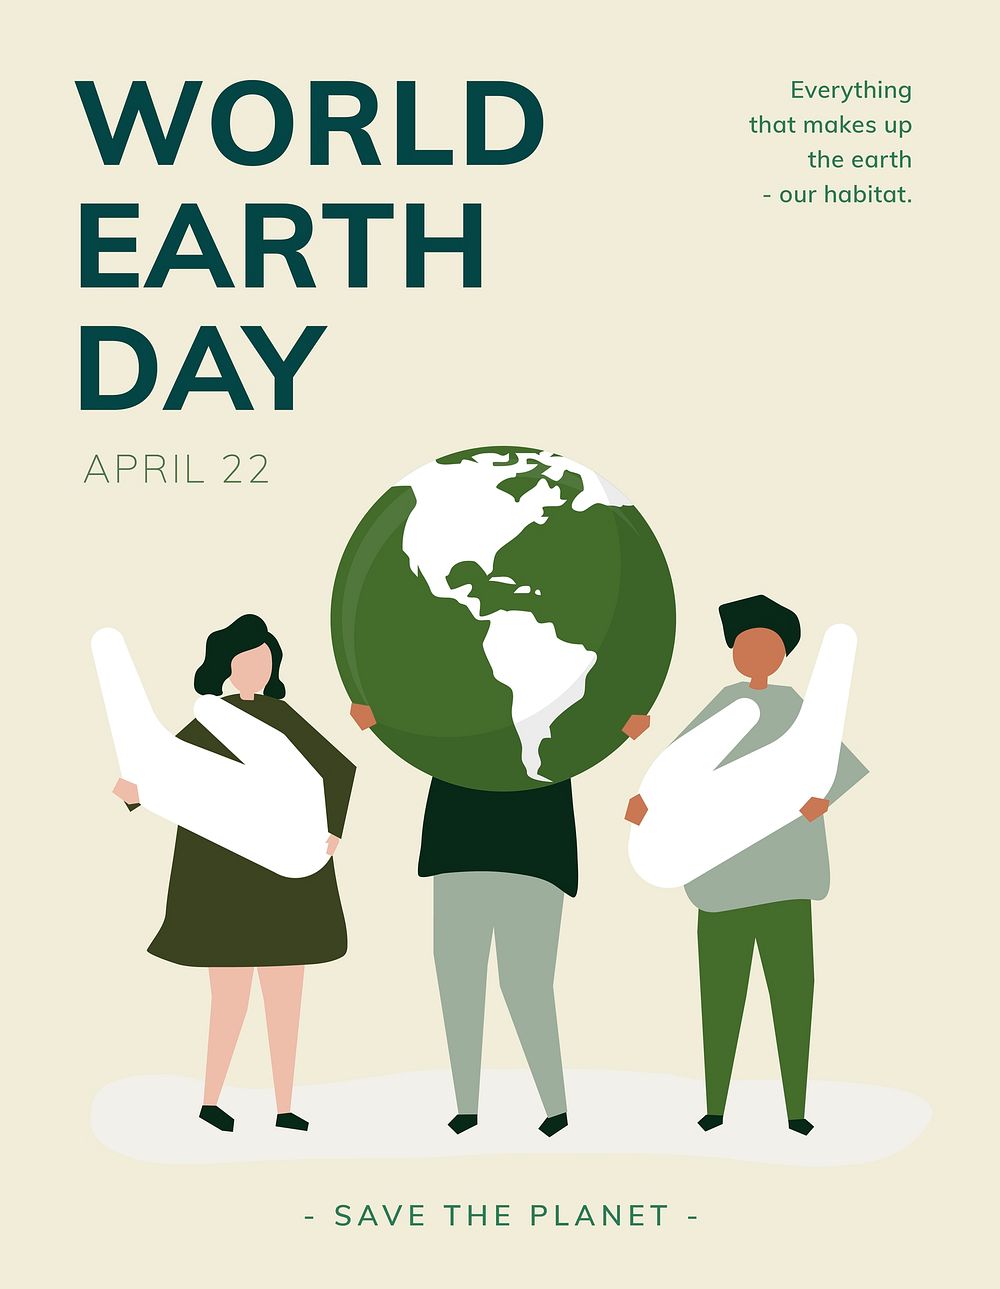 World earth day poster with people holding globe